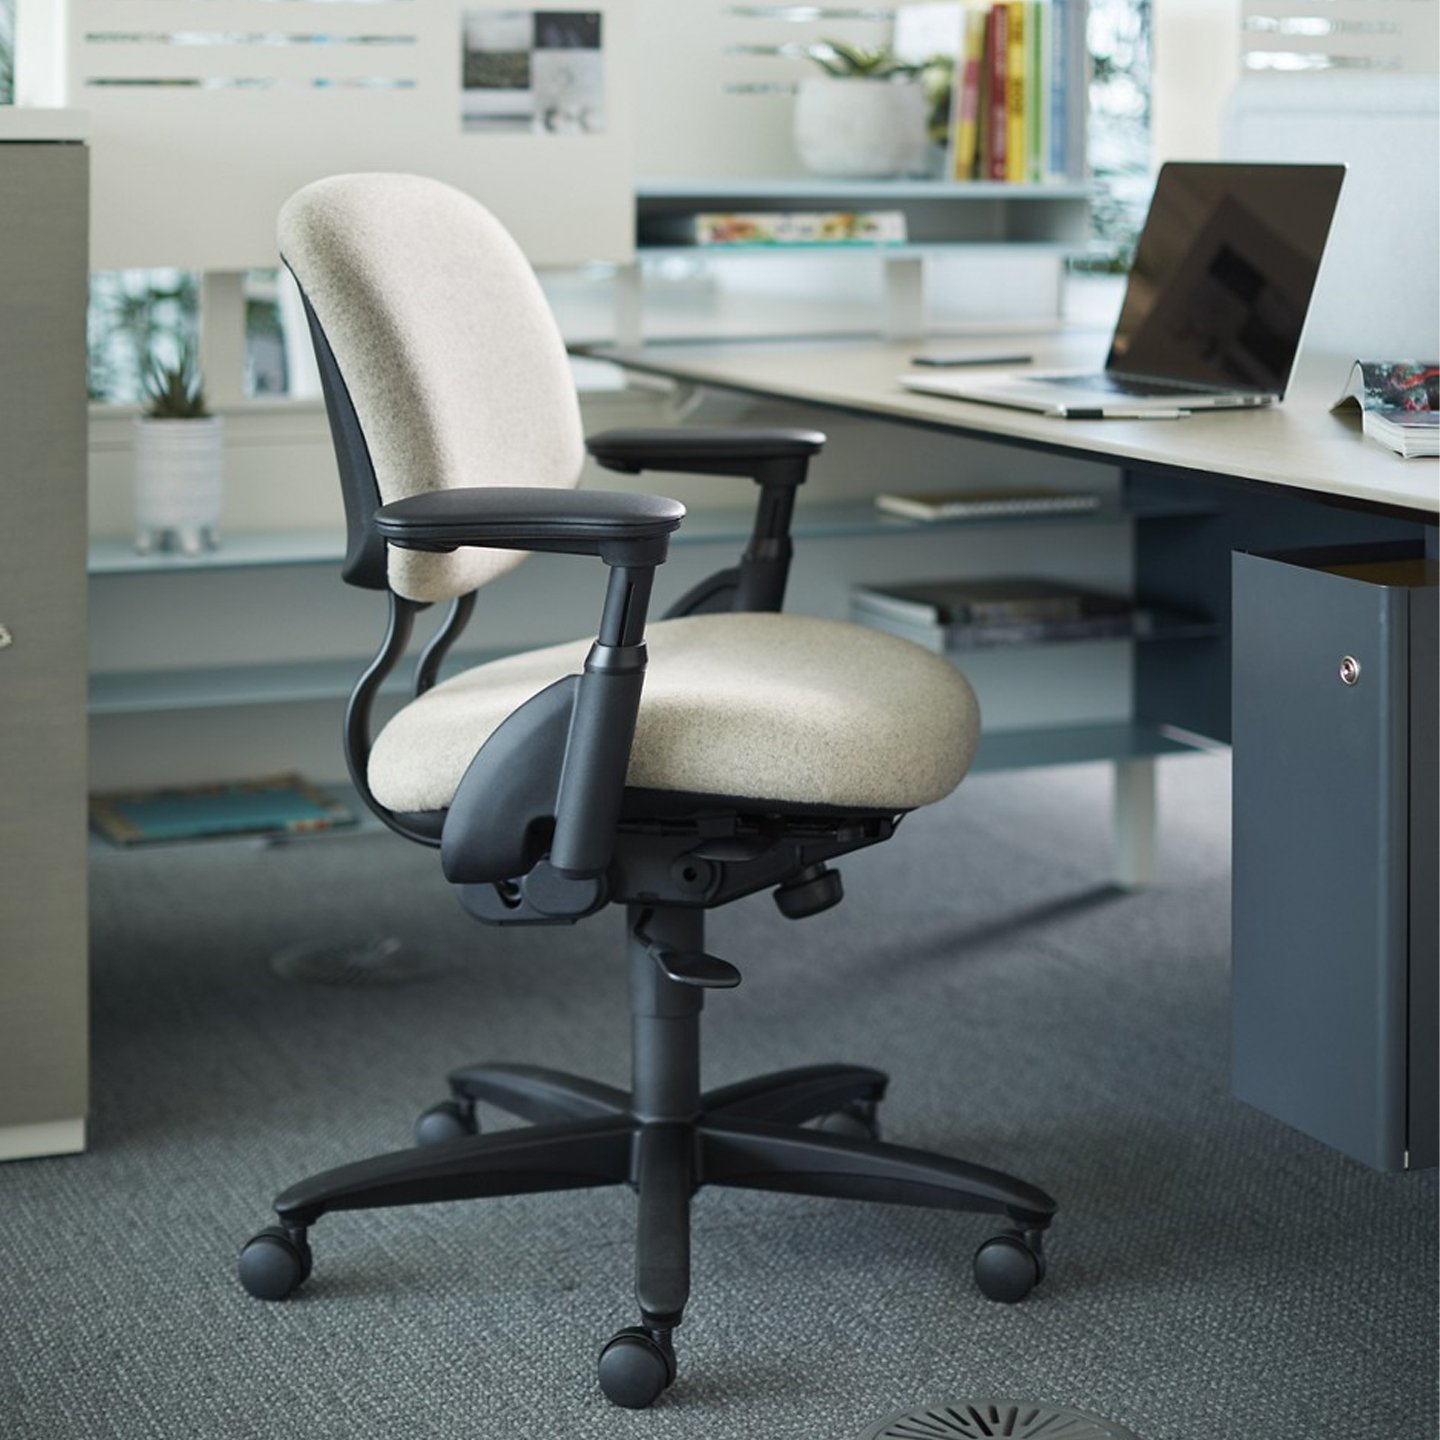 Haworth Improv H E desk chair in beige upholstery at a workstation